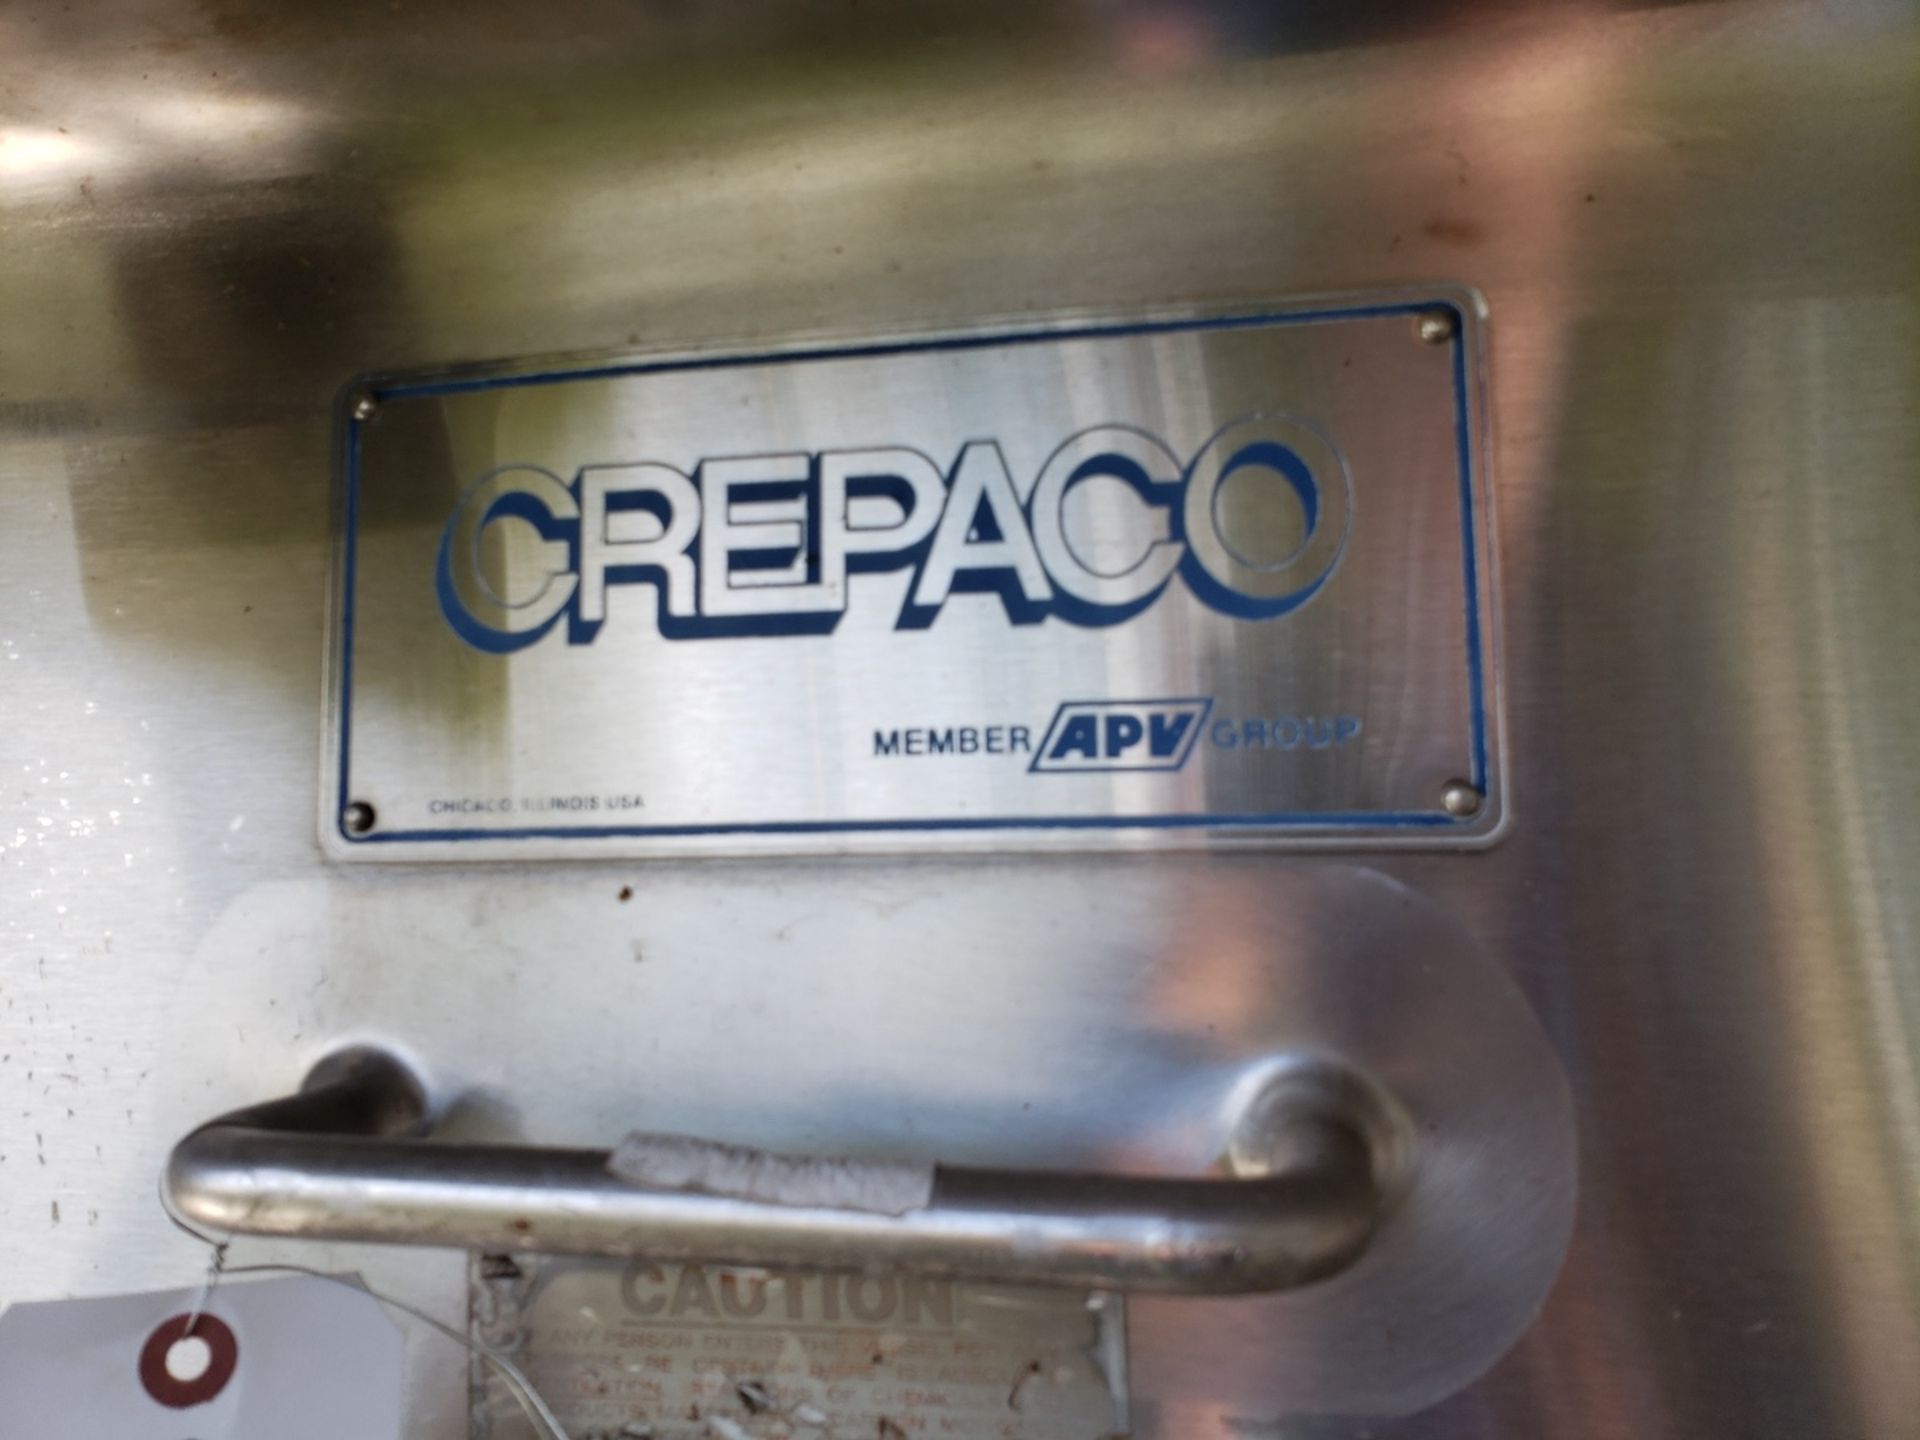 Crepaco 8,500 Gallon Insulated Stainless Steel Storage Silo | Rig Fee: $4500 - Image 3 of 6